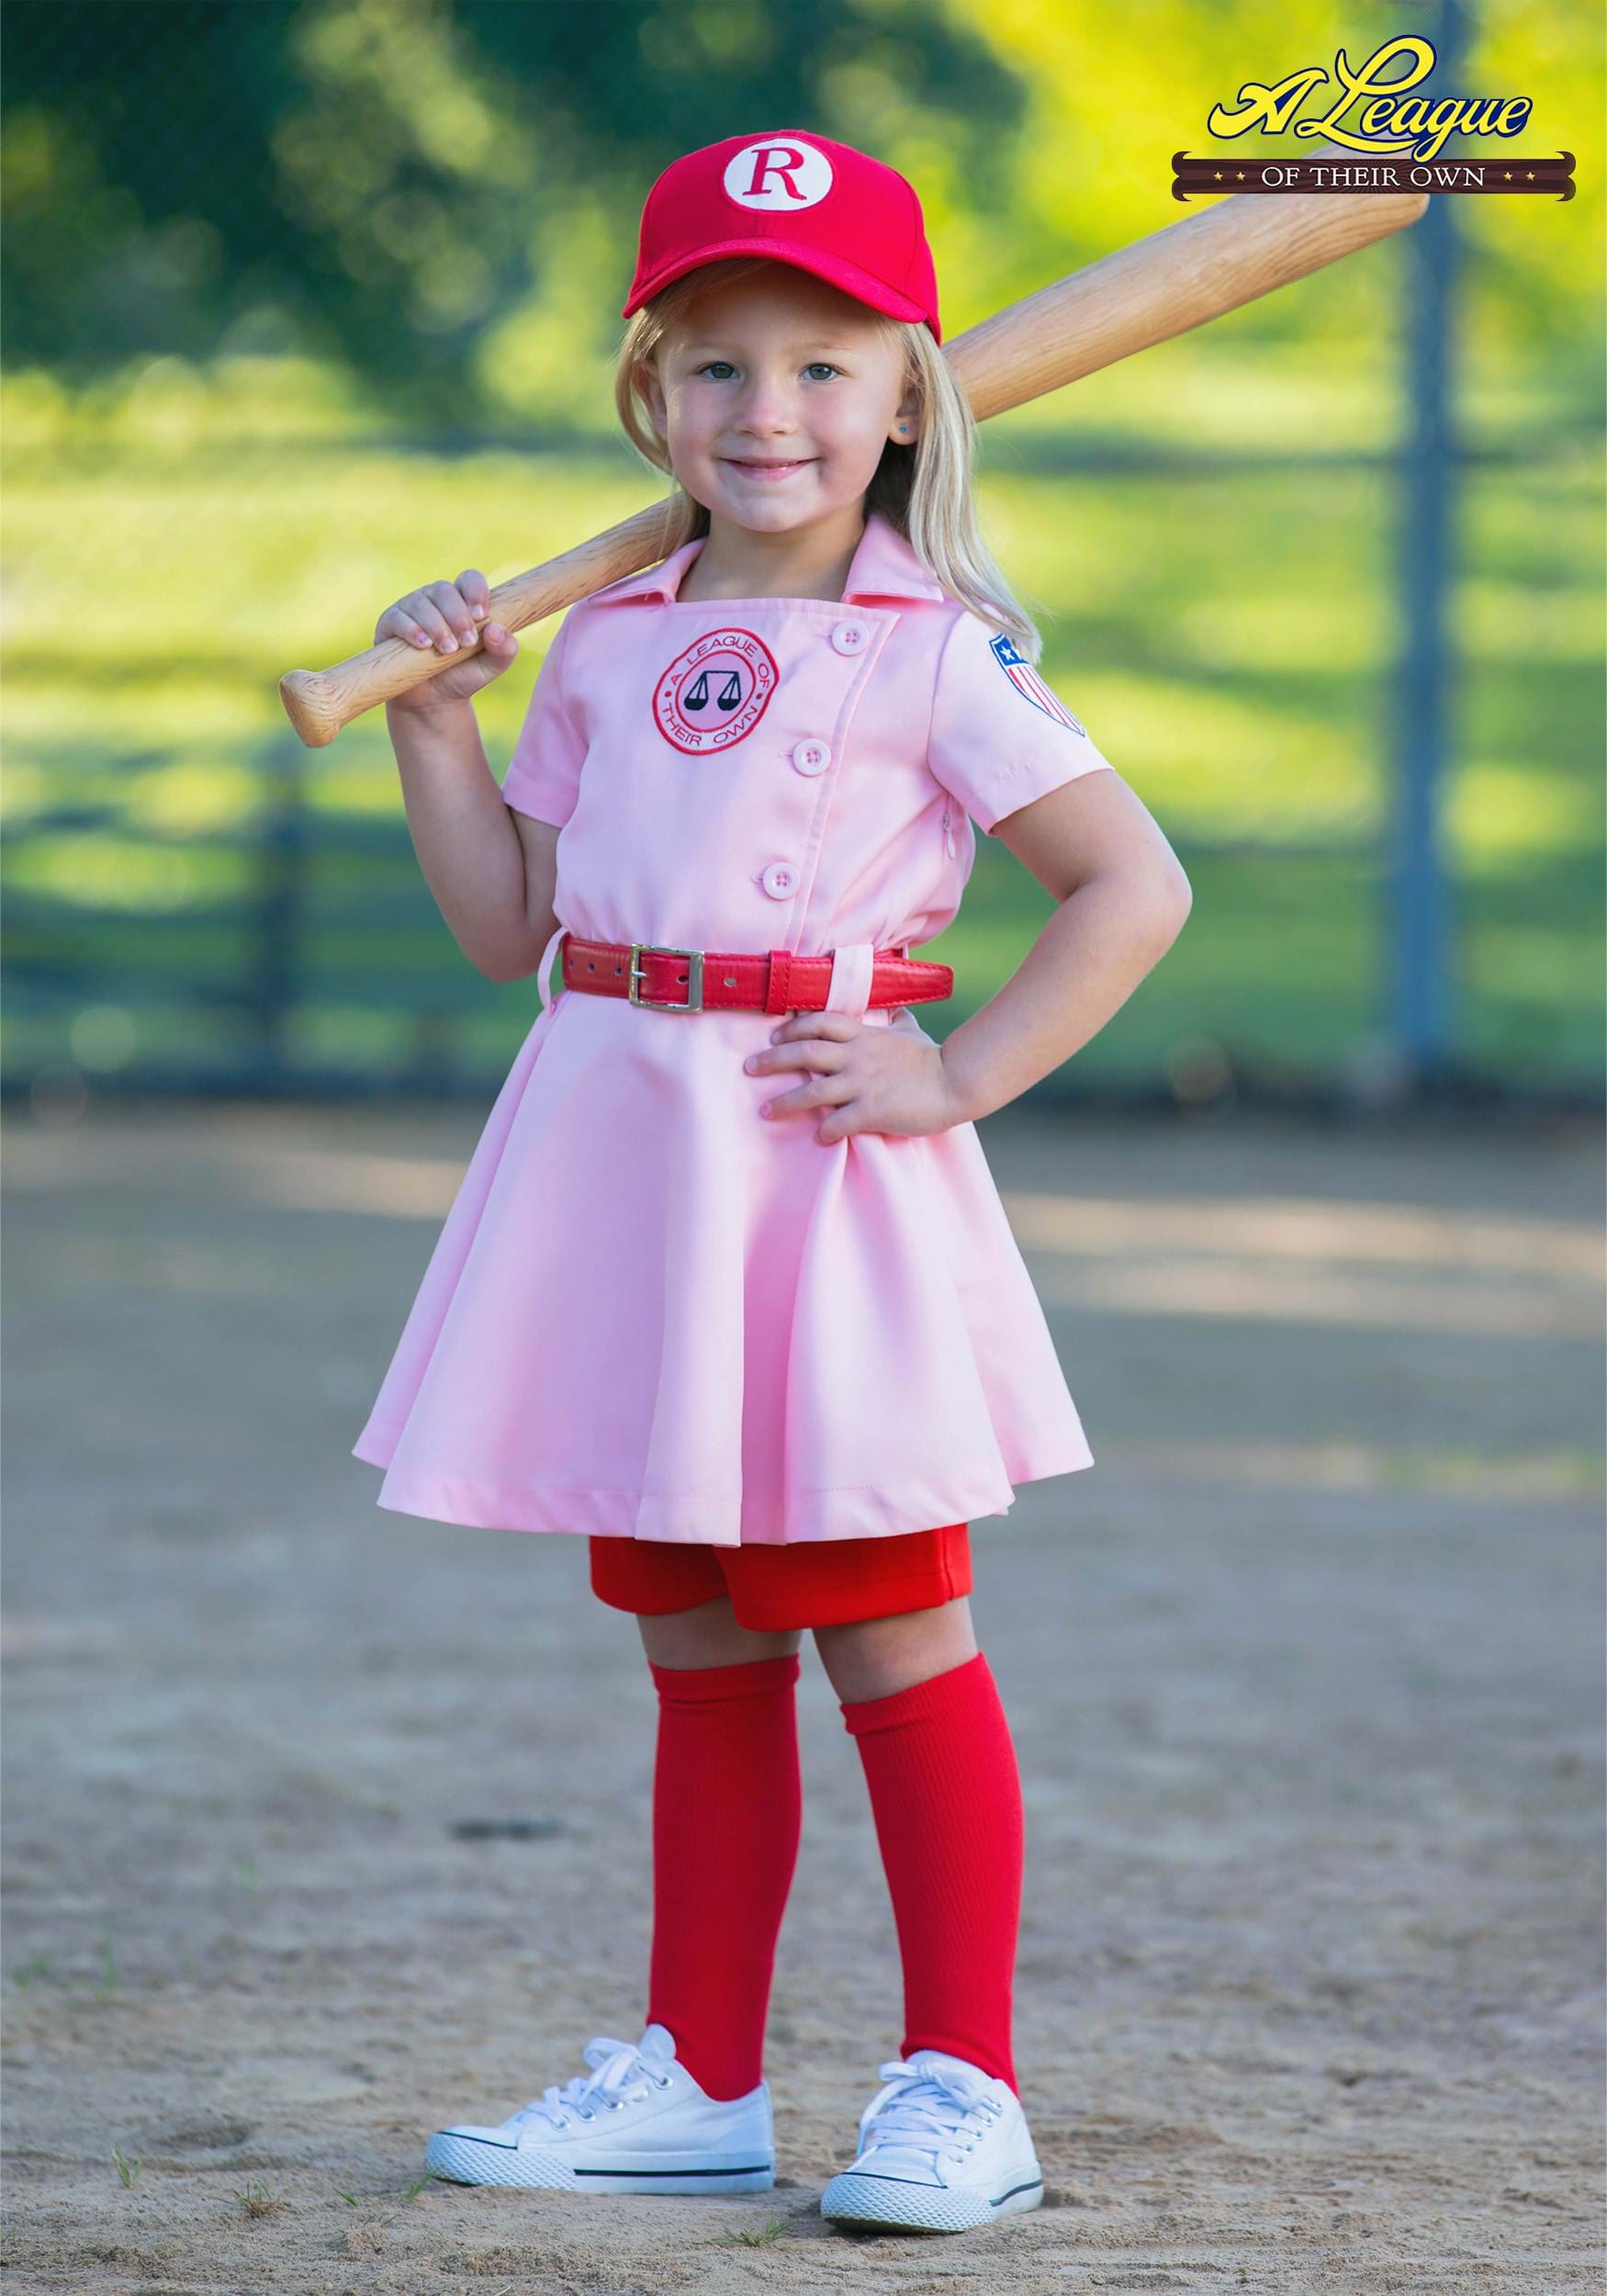 A League of Their Own Toddler Dottie Baseball Costume 4T 